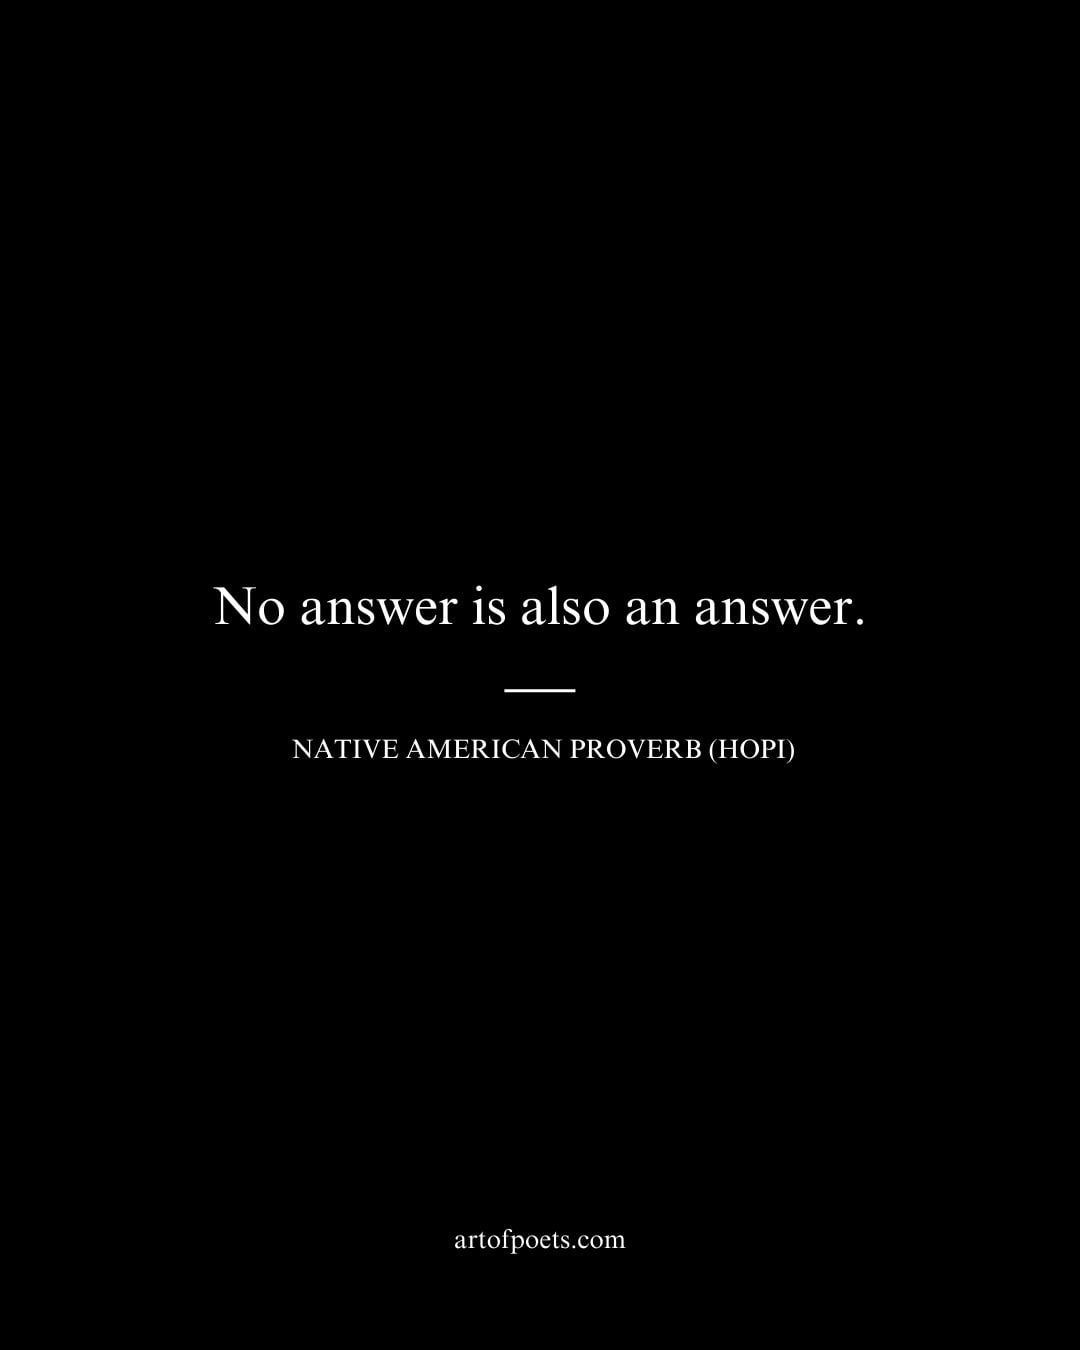 No answer is also an answer